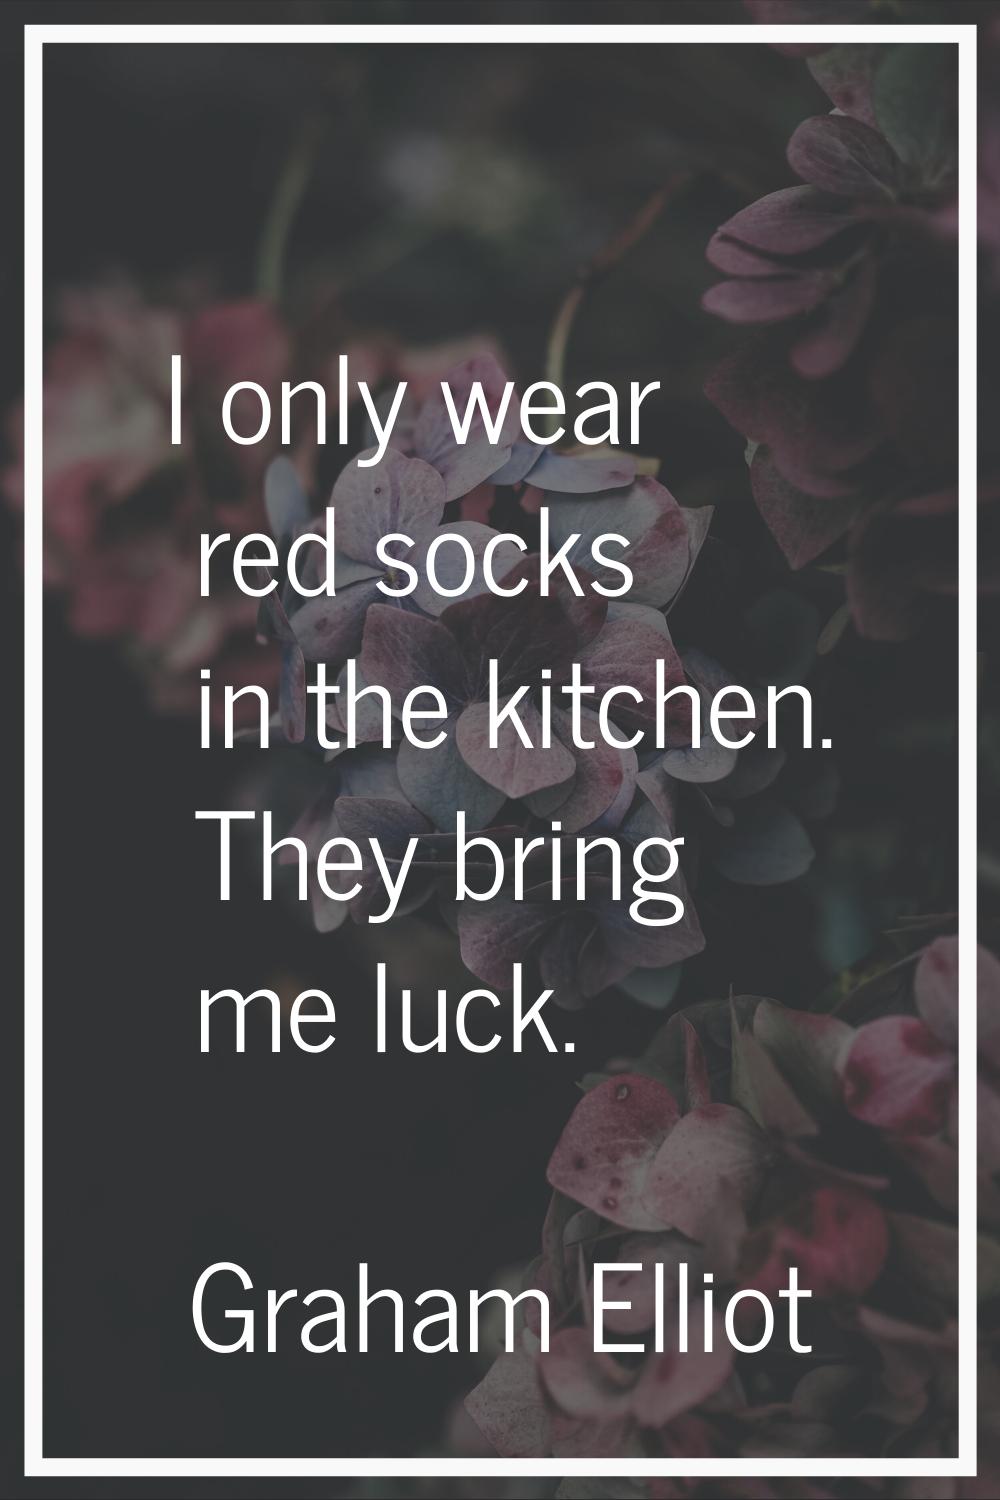 I only wear red socks in the kitchen. They bring me luck.